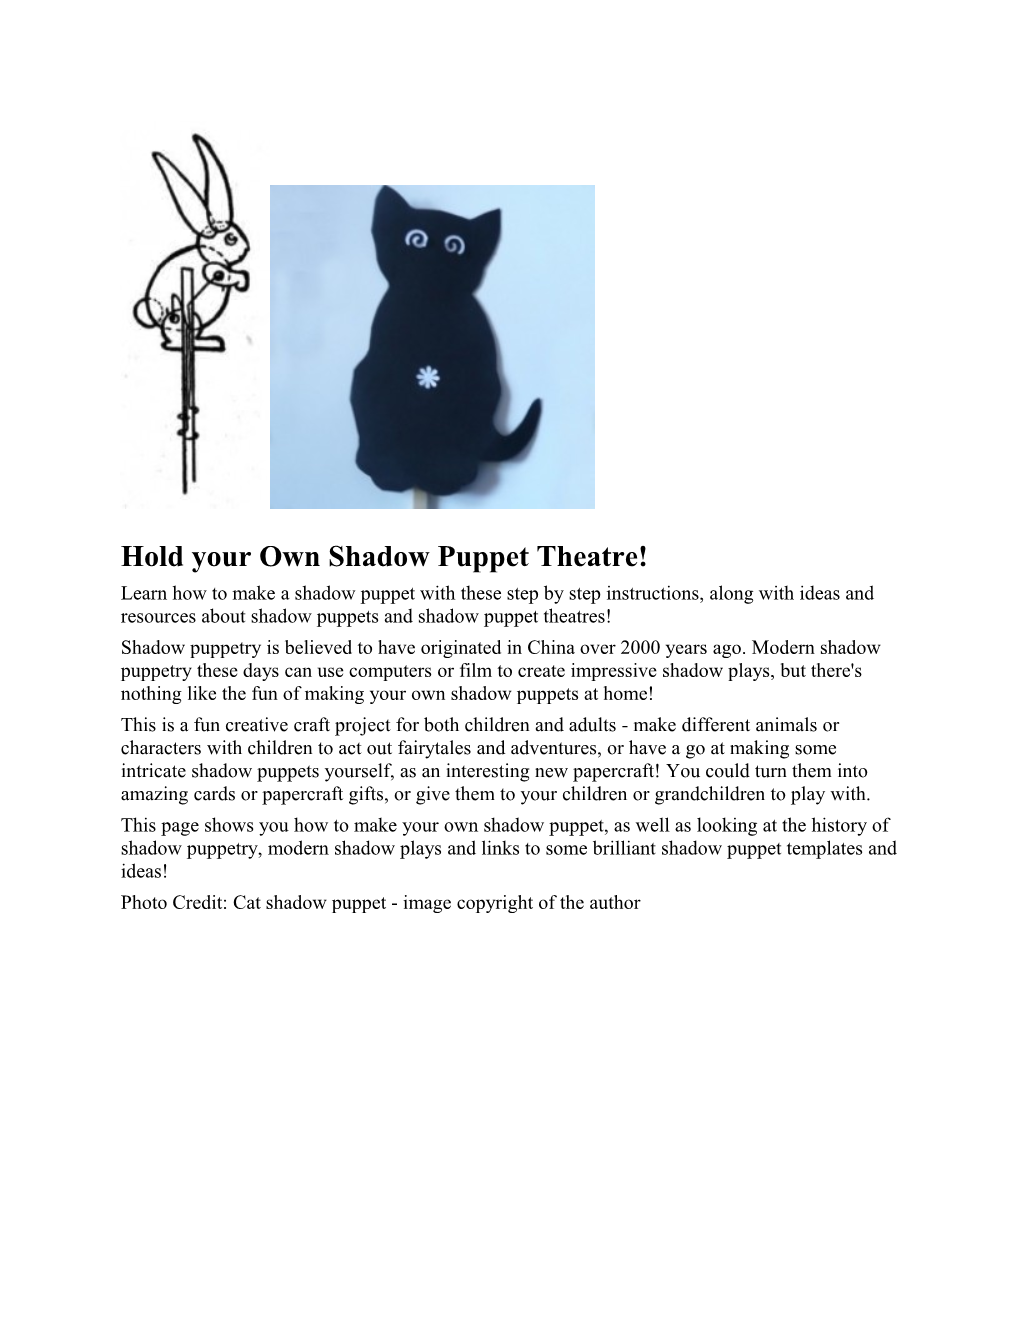 Hold Your Own Shadow Puppet Theatre!